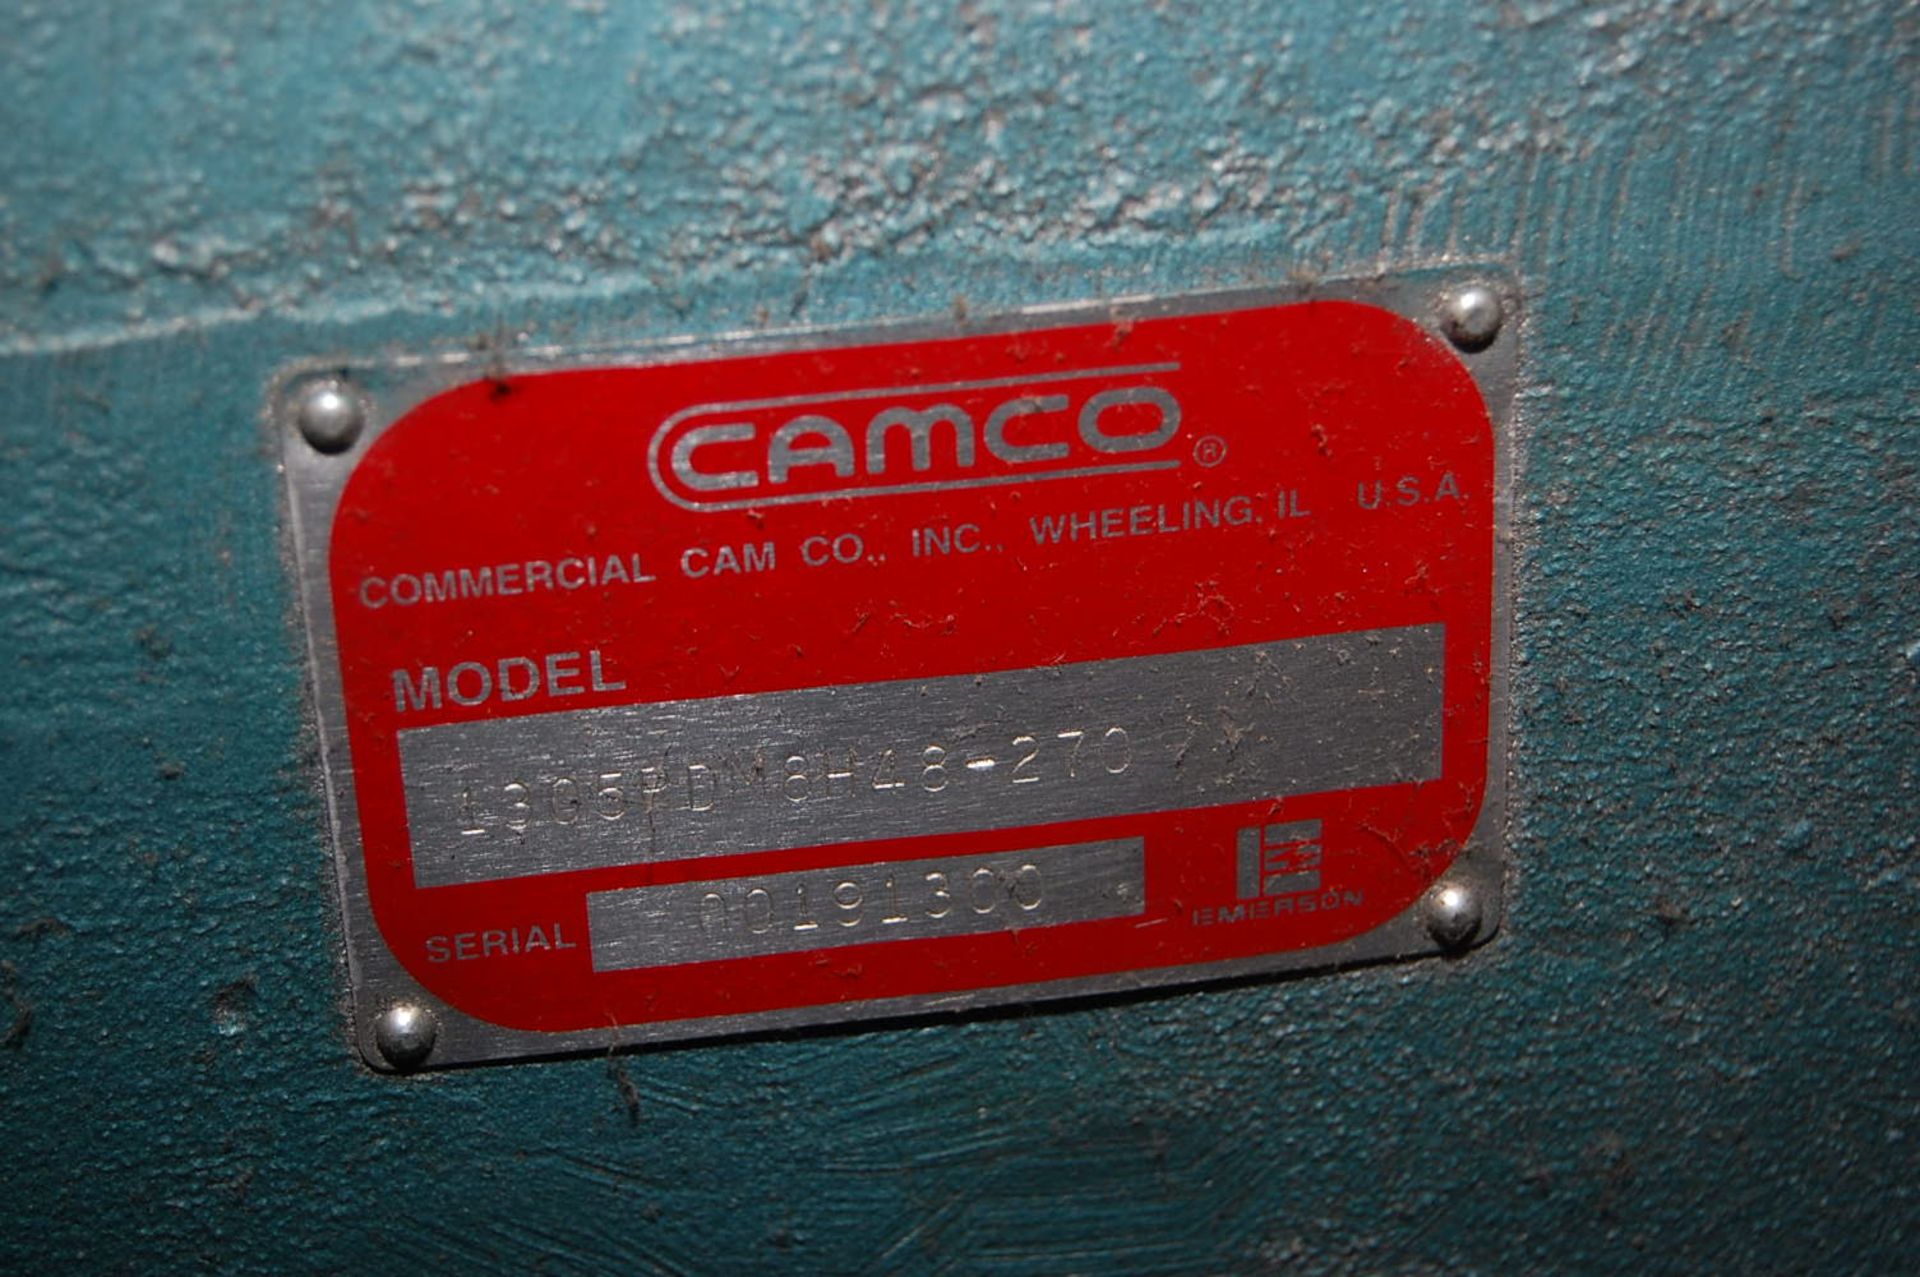 Camco Model #1305RDM8H48-270 Motorized Rotary Indexers Serial #191300, Note - Extra Controls - Image 2 of 2